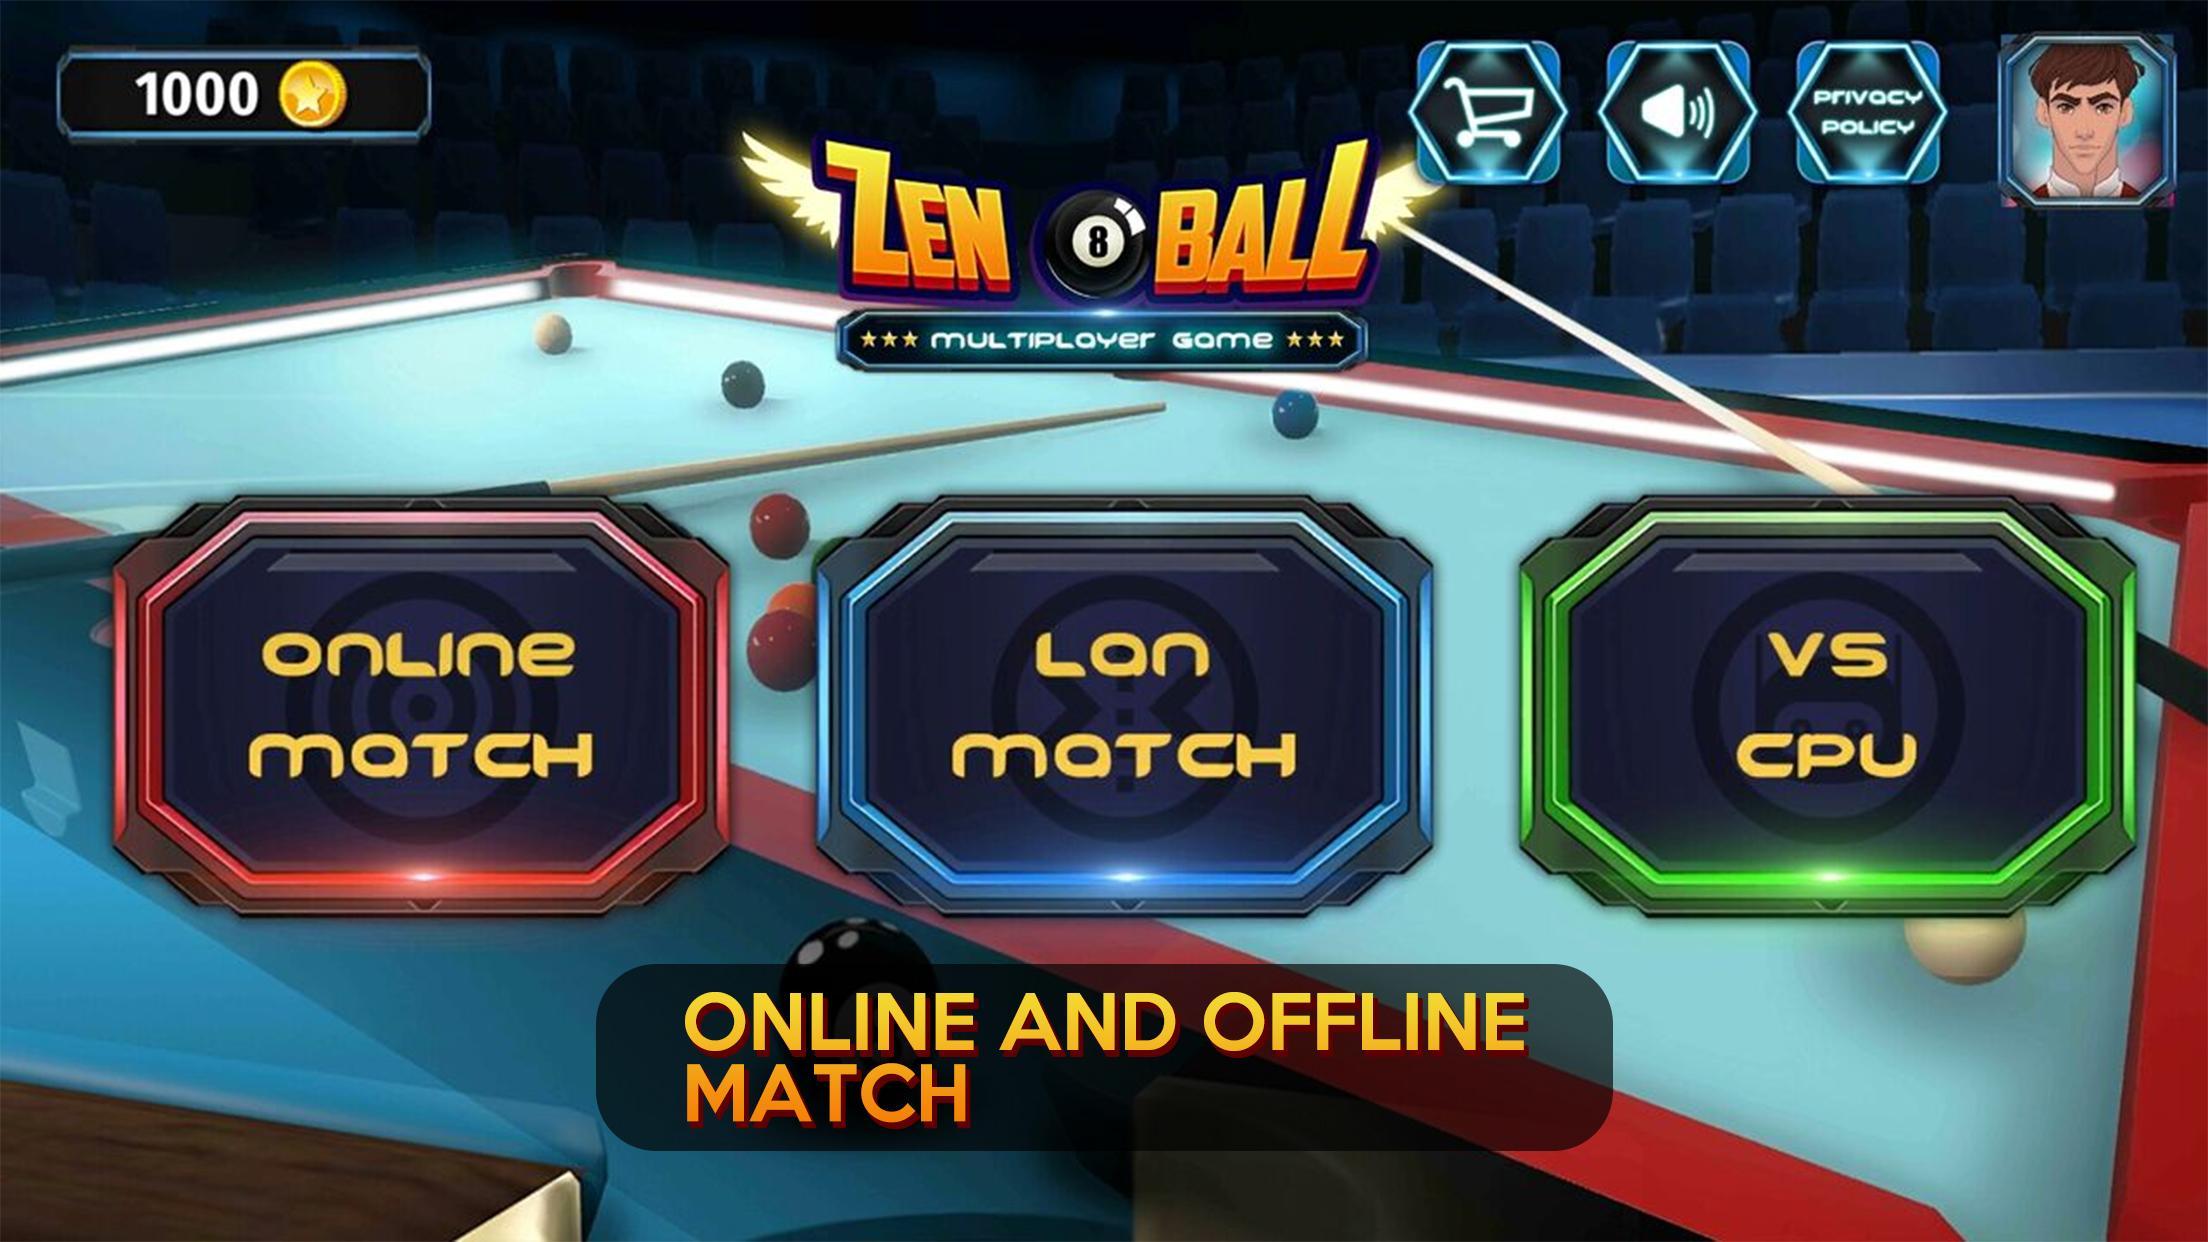 Zen 8 Ball Multiplayer Game For Android Apk Download